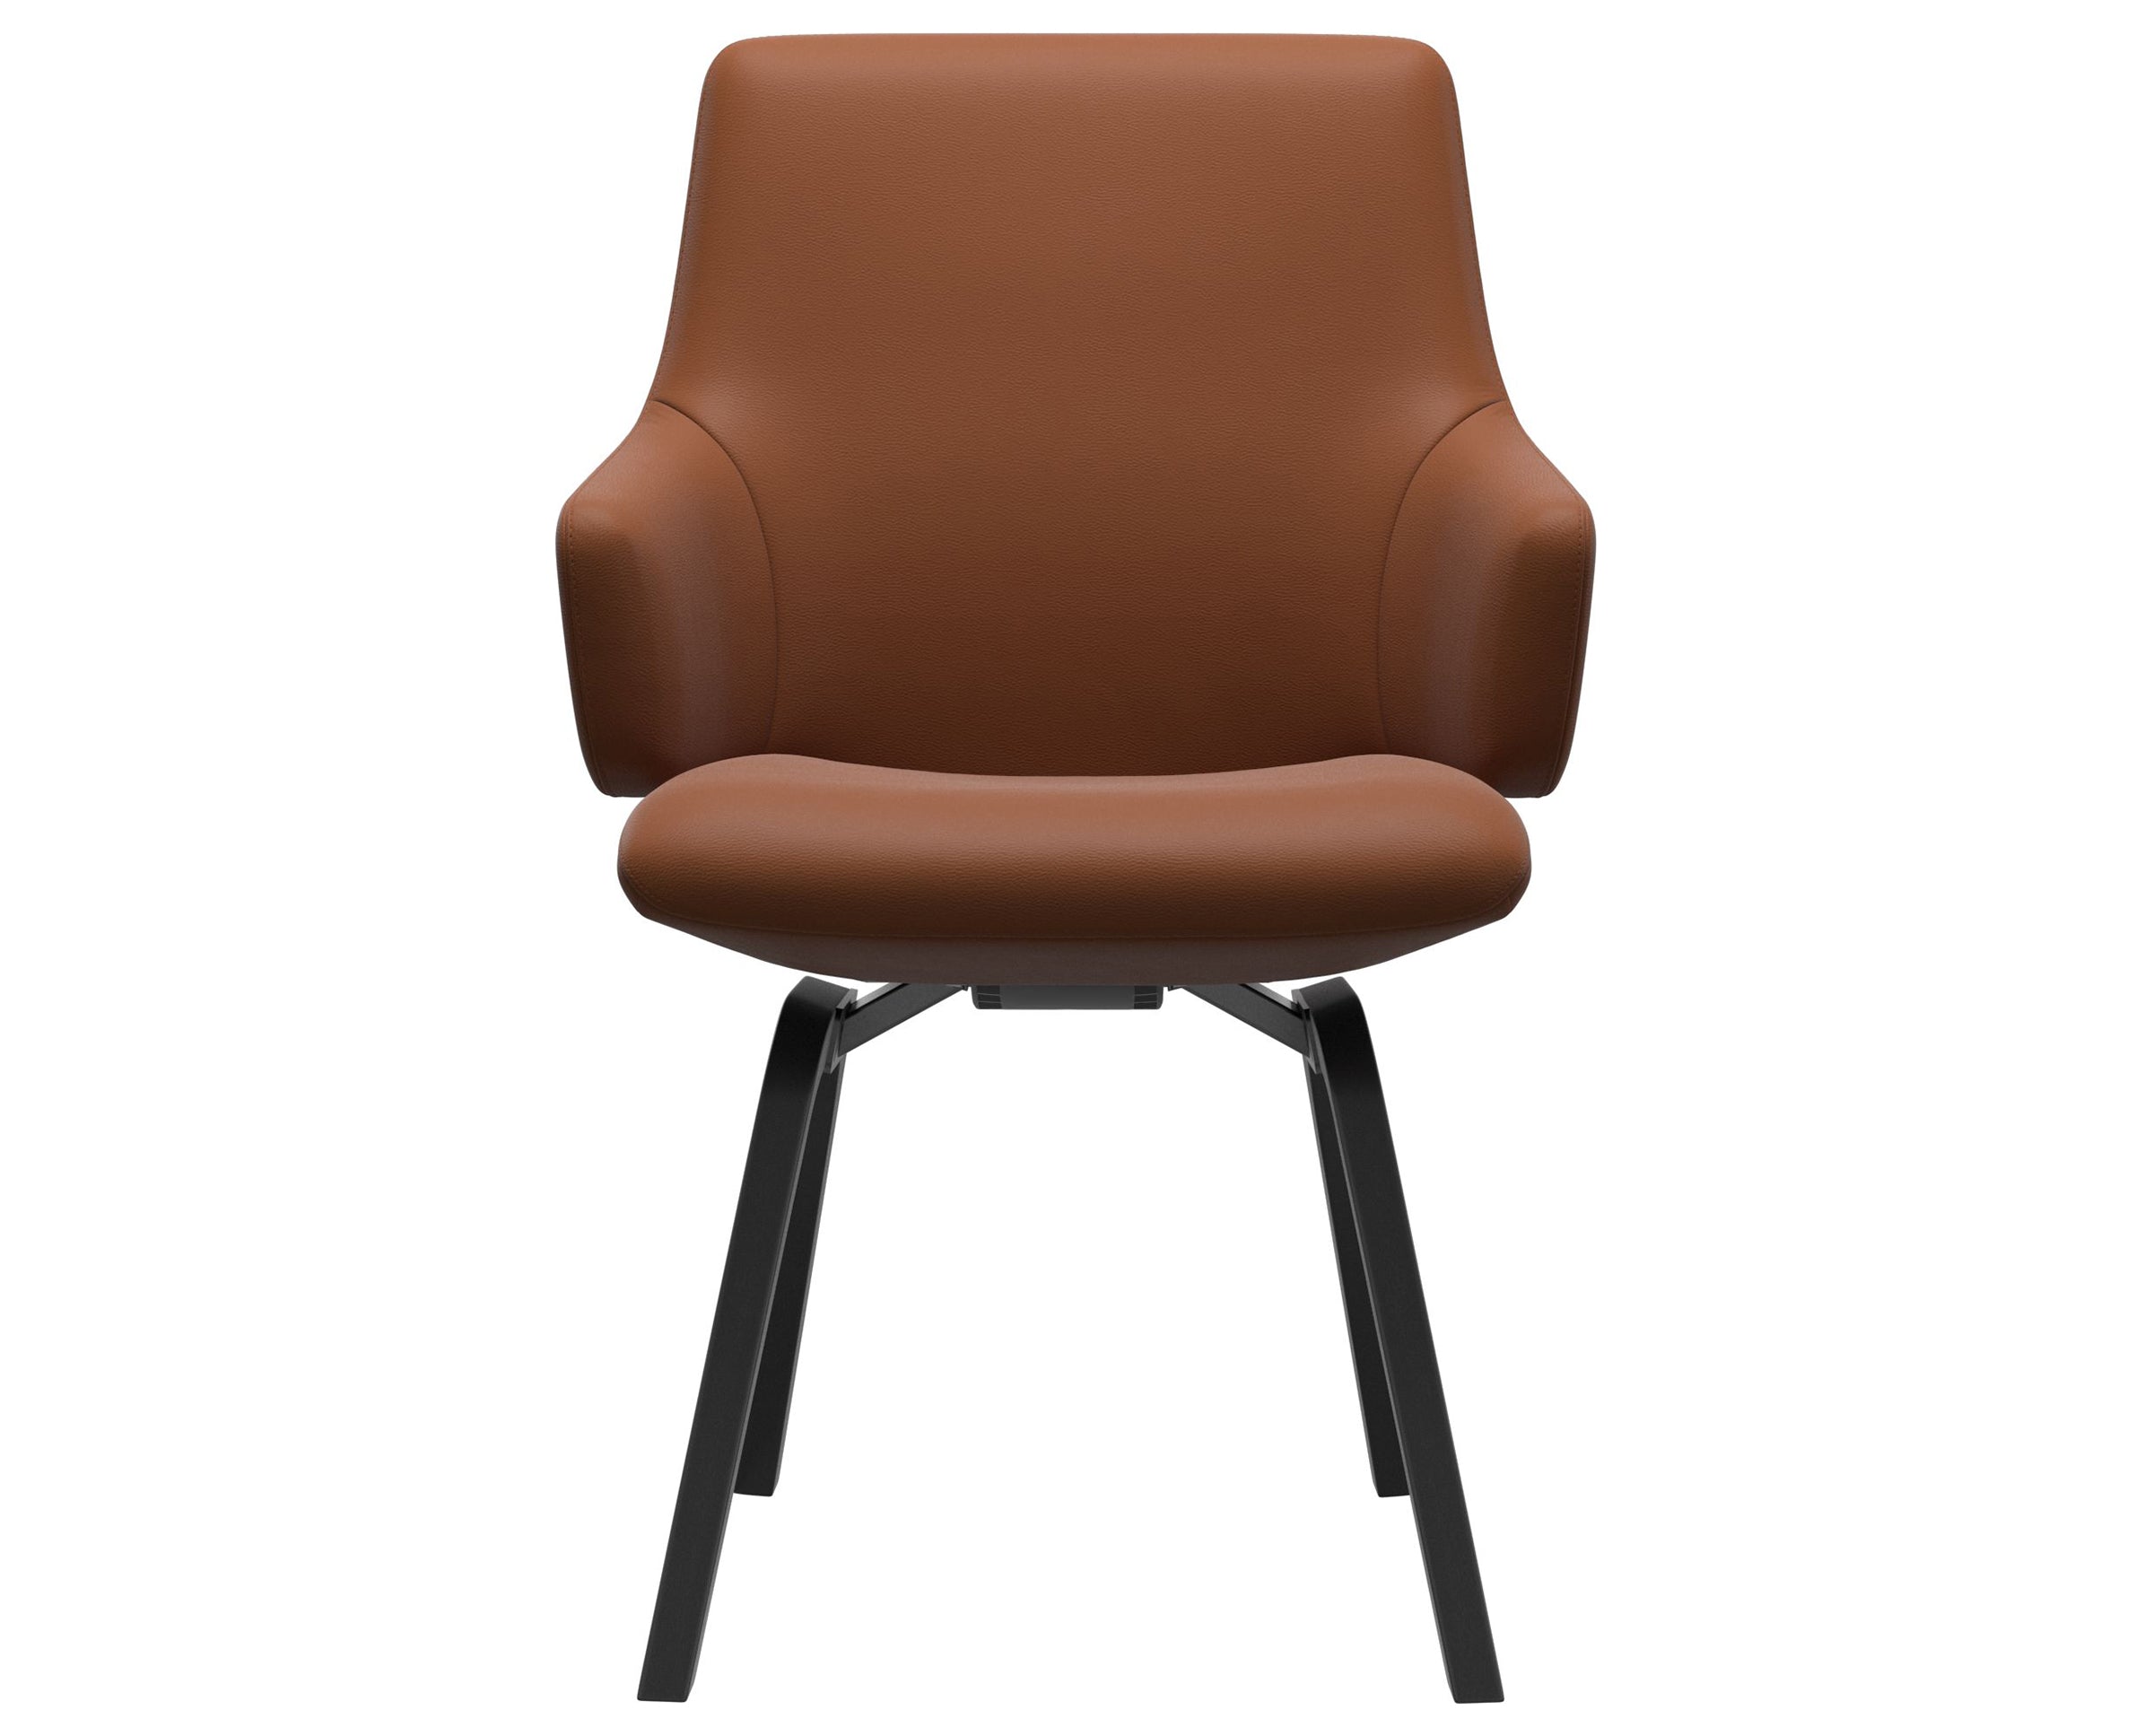 Paloma Leather New Cognac and Black Base | Stressless Laurel Low Back D200 Dining Chair w/Arms | Valley Ridge Furniture